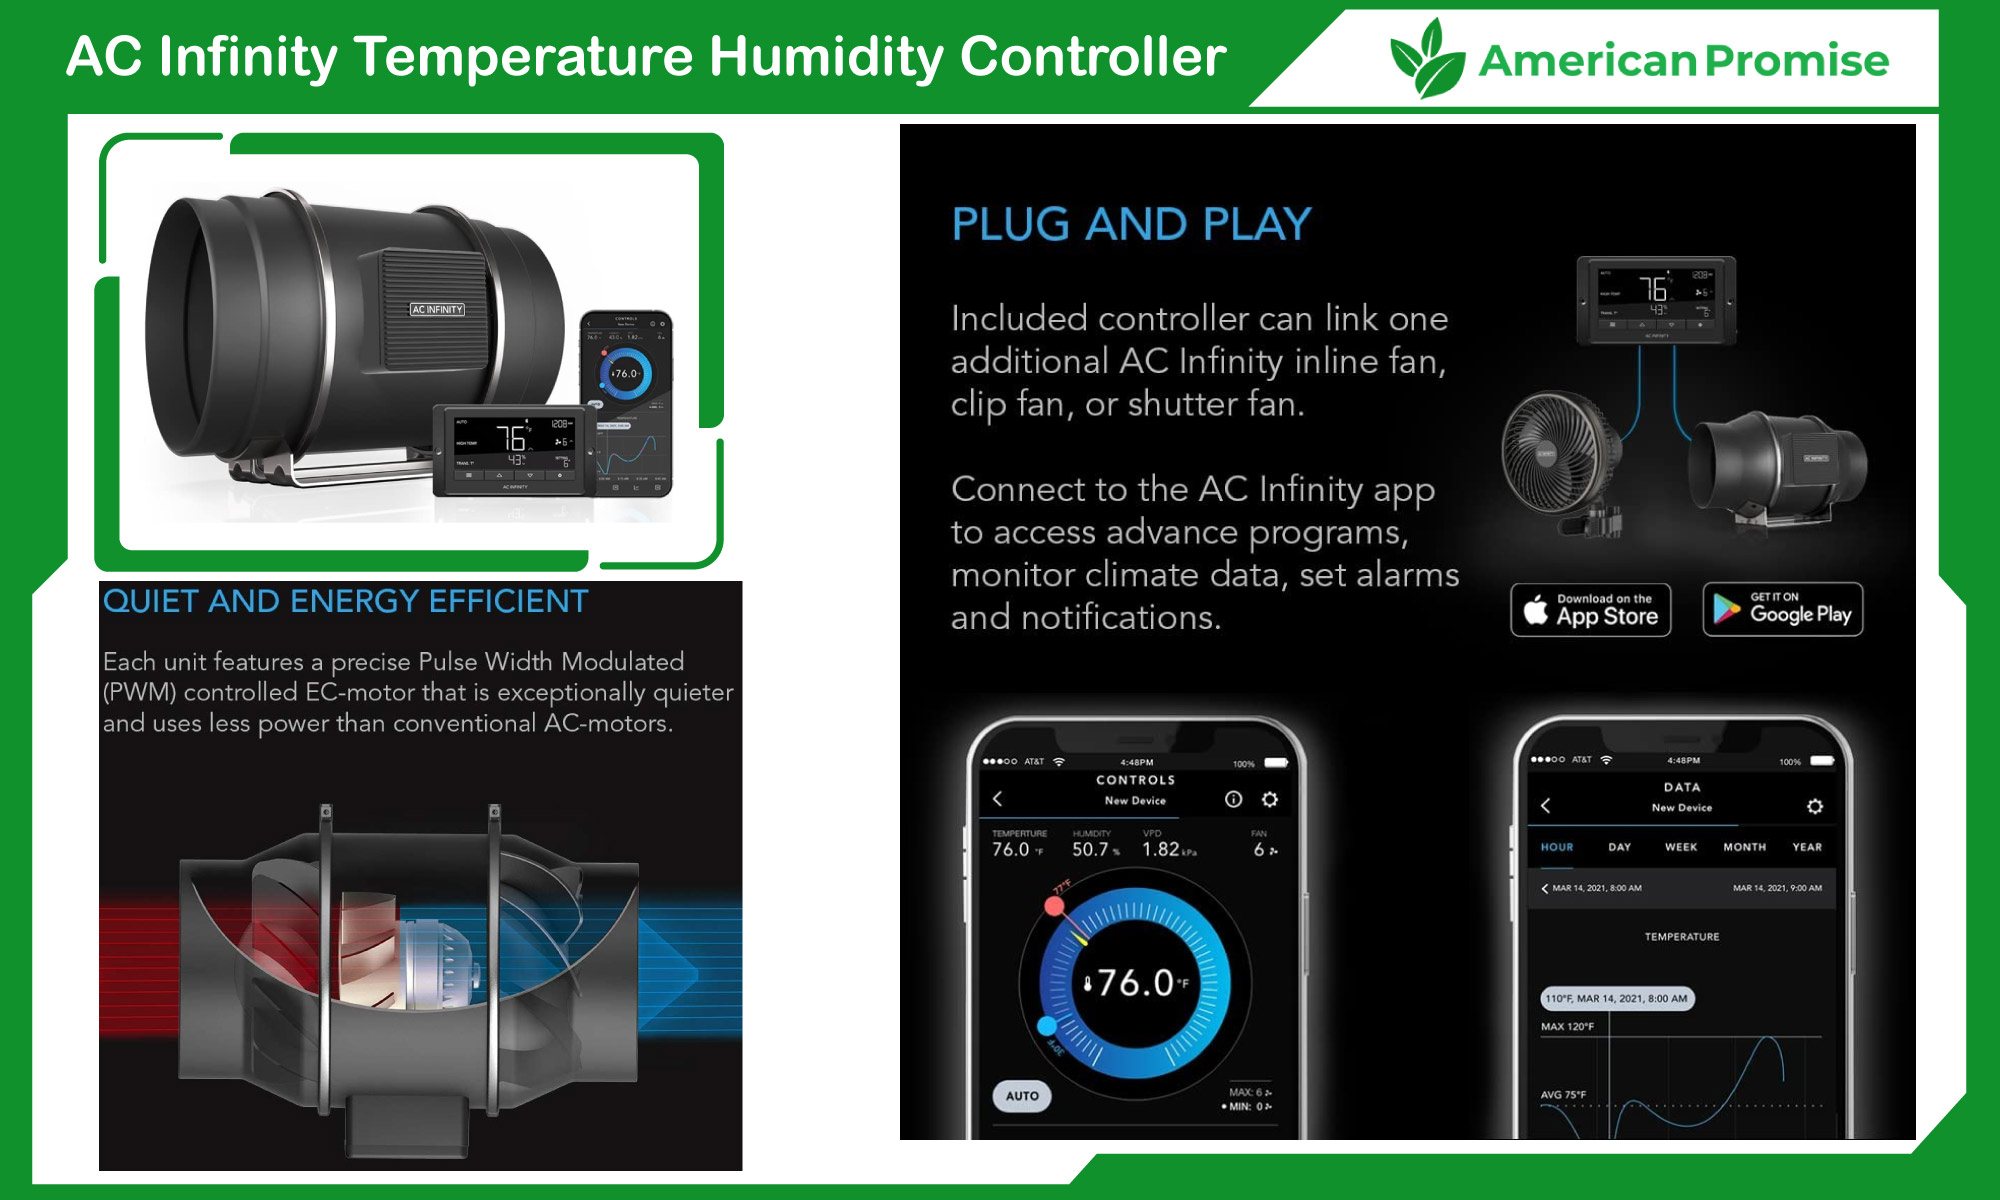 AC Infinity Humidity Controller